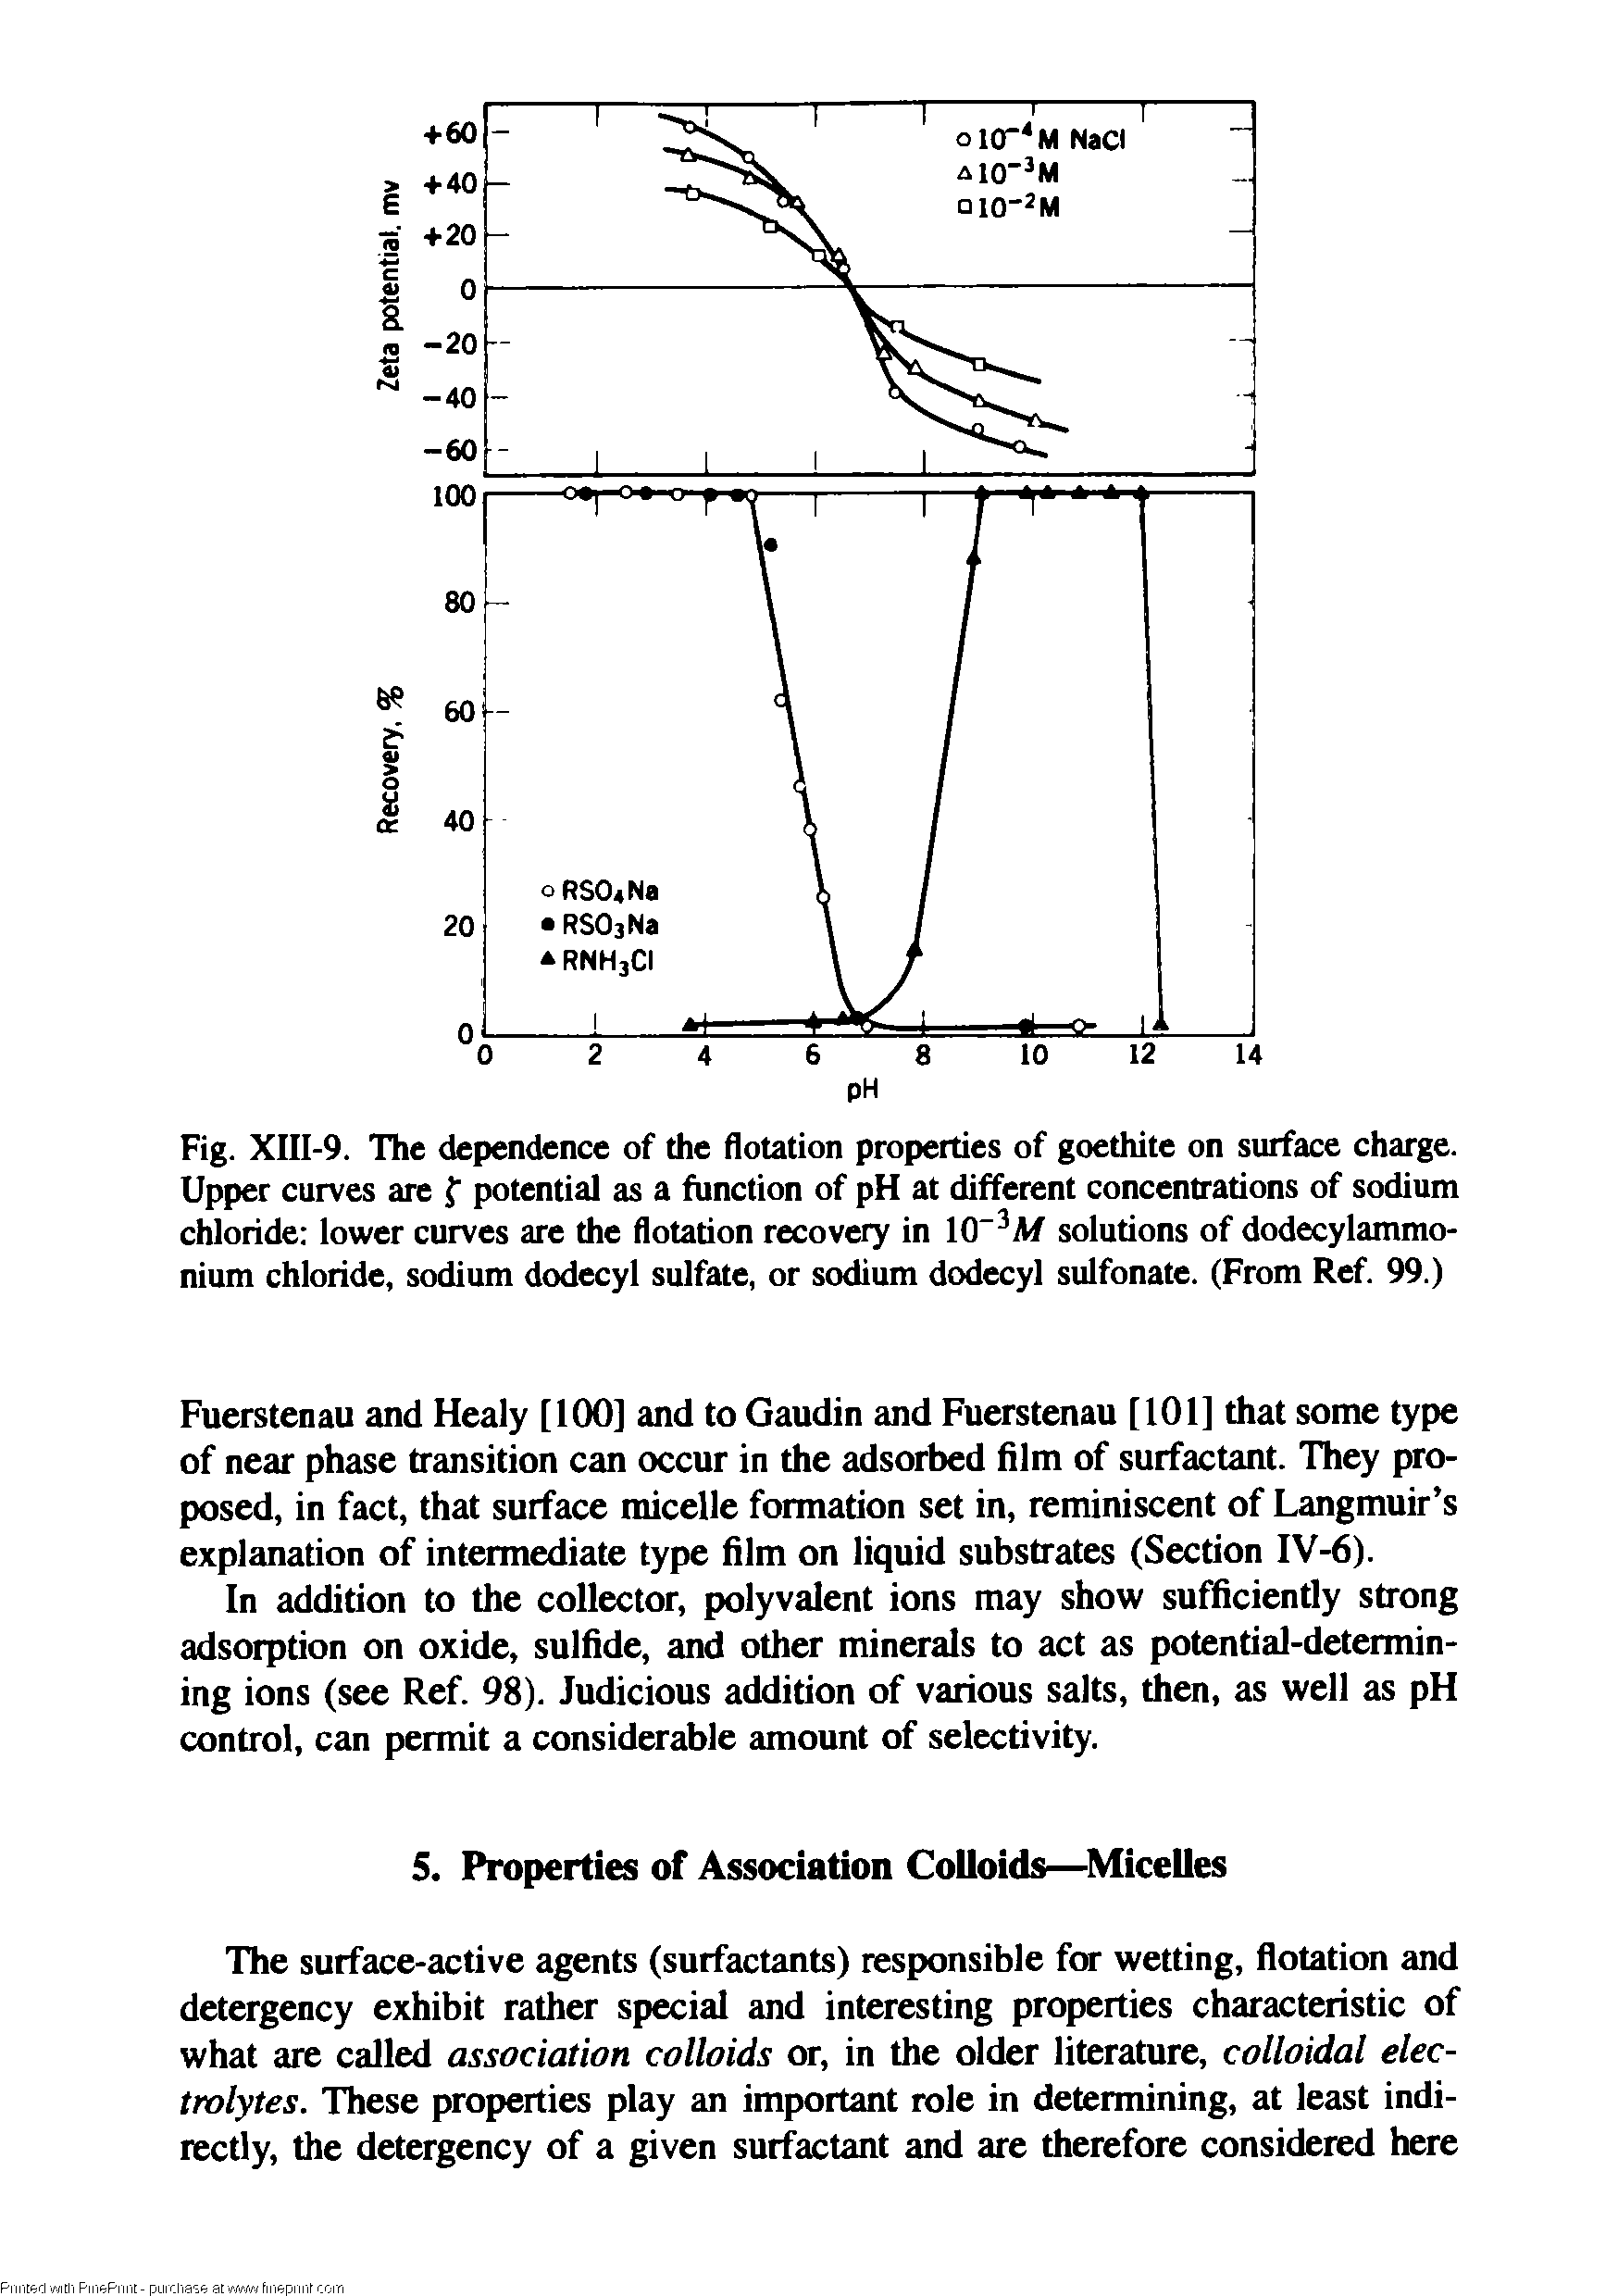 Fig. XIII-9. The dependence of the flotation properties of goethite on surface charge. Upper curves are potential as a function of pH at different concentrations of sodium chloride lower curves are the flotation recovery in 10 M solutions of dodecylammo-nium chloride, sodium dodecyl sulfate, or sodium dodecyl sulfonate. (From Ref. 99.)...